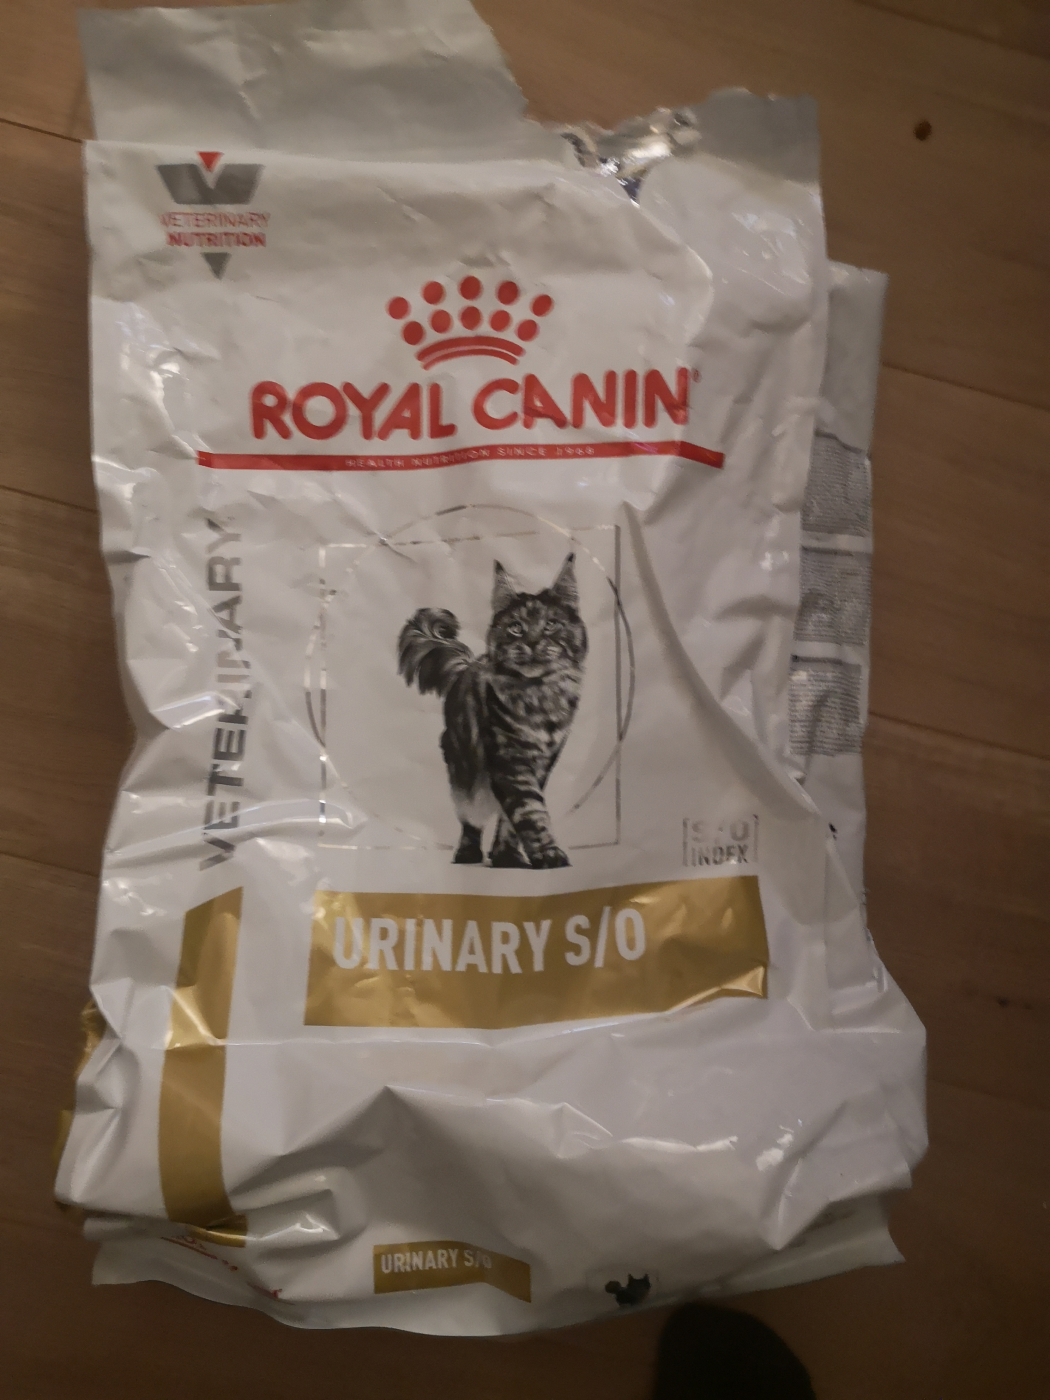 Royal Canin Veterinary Diet Urinary S/O LP34 pour chat